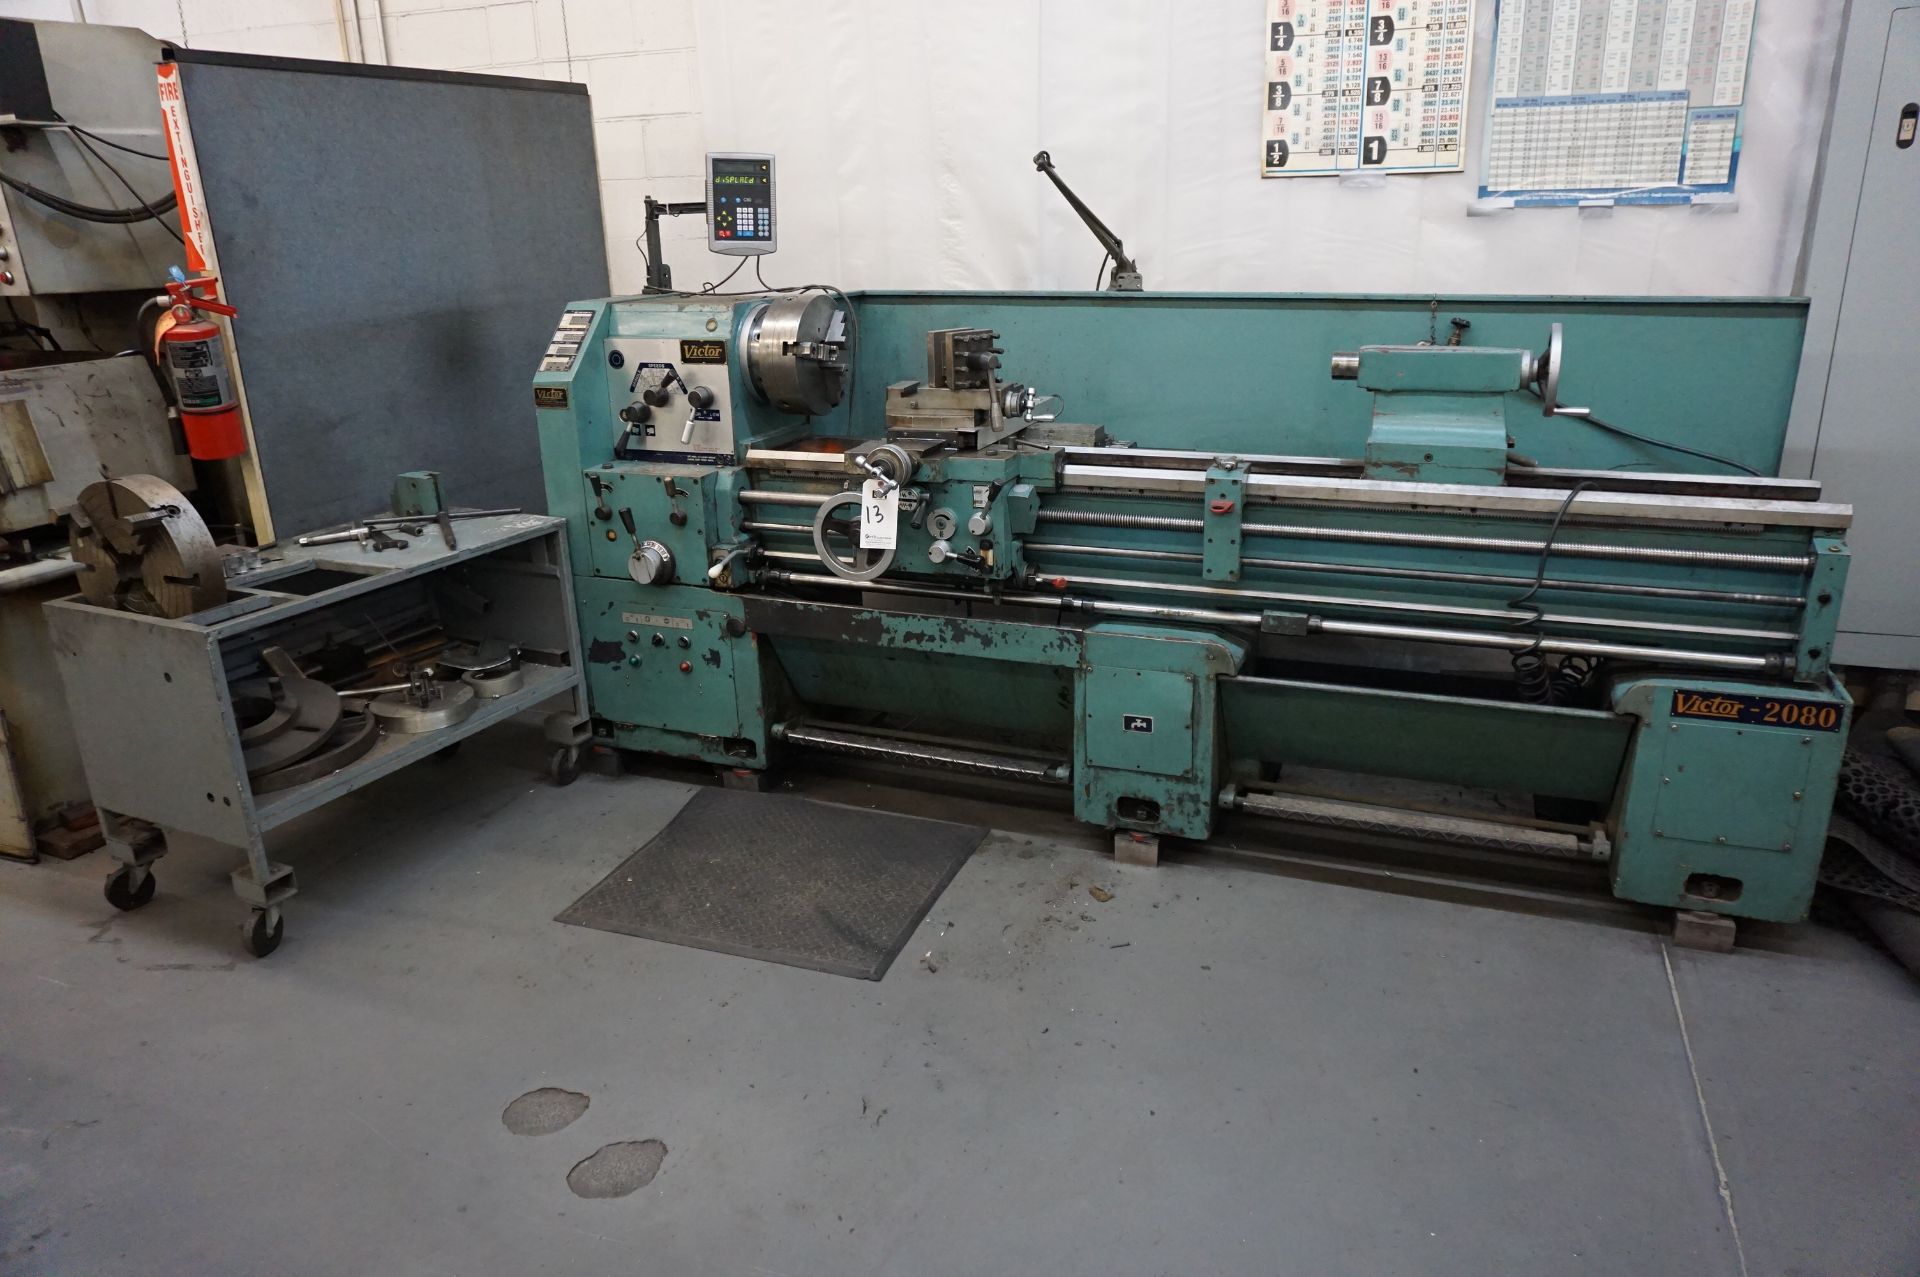 VICTOR 2080 ENGINE LATHE, S/N 710344, 10 HP, 220 V, CYCLES 60, 3 PHASE, CART WITH MANUALS, CHUCKS,